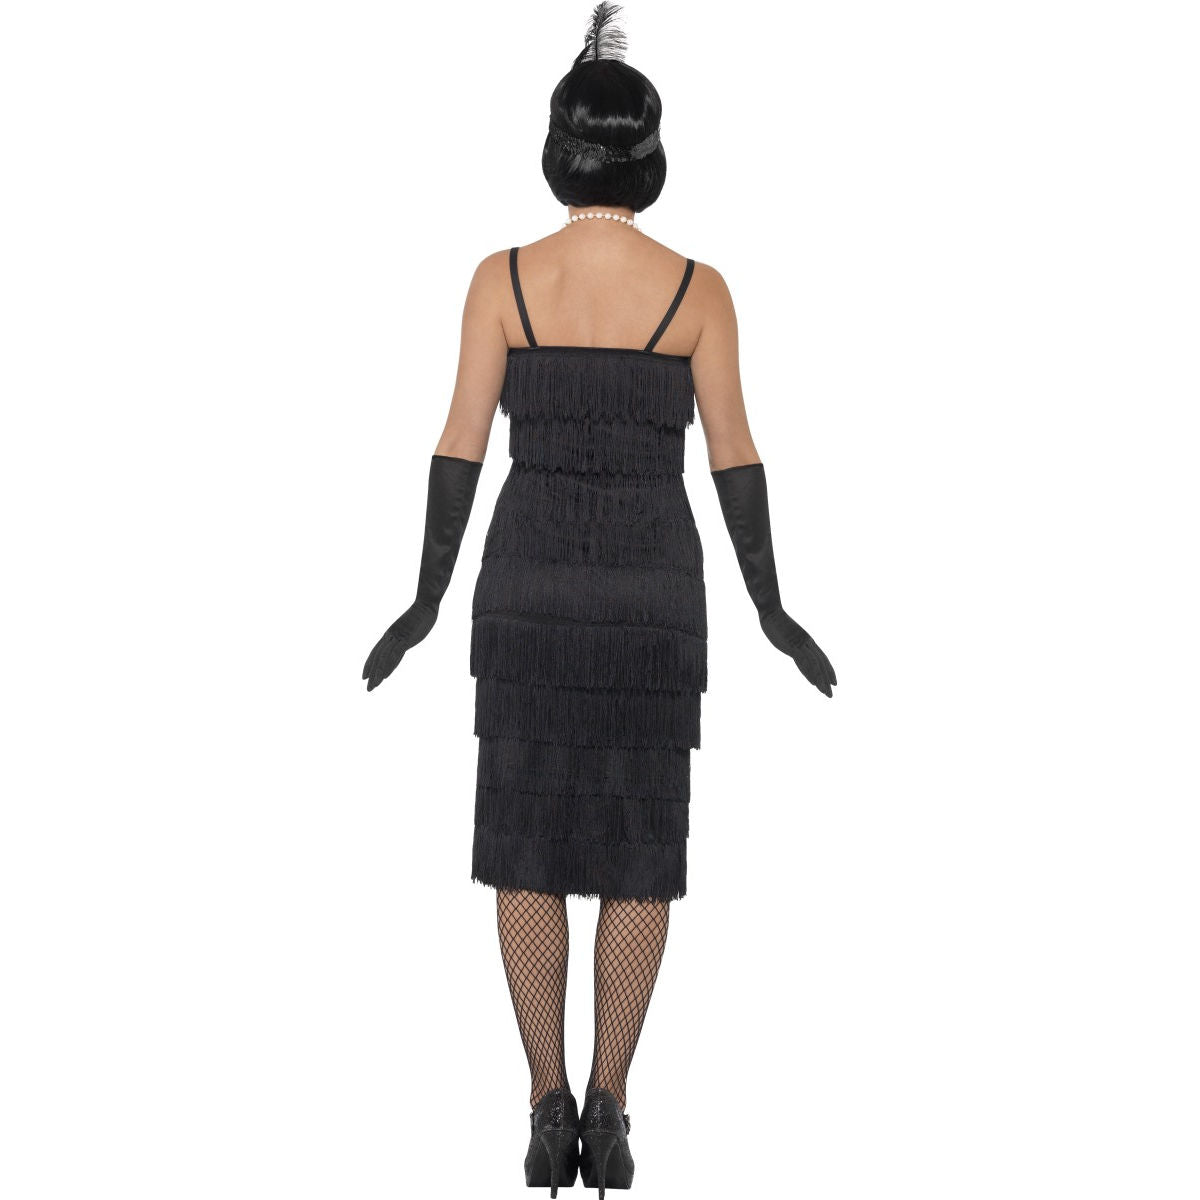 Black Glamour Gatsby Flapper Costume with Gloves and Headpiece